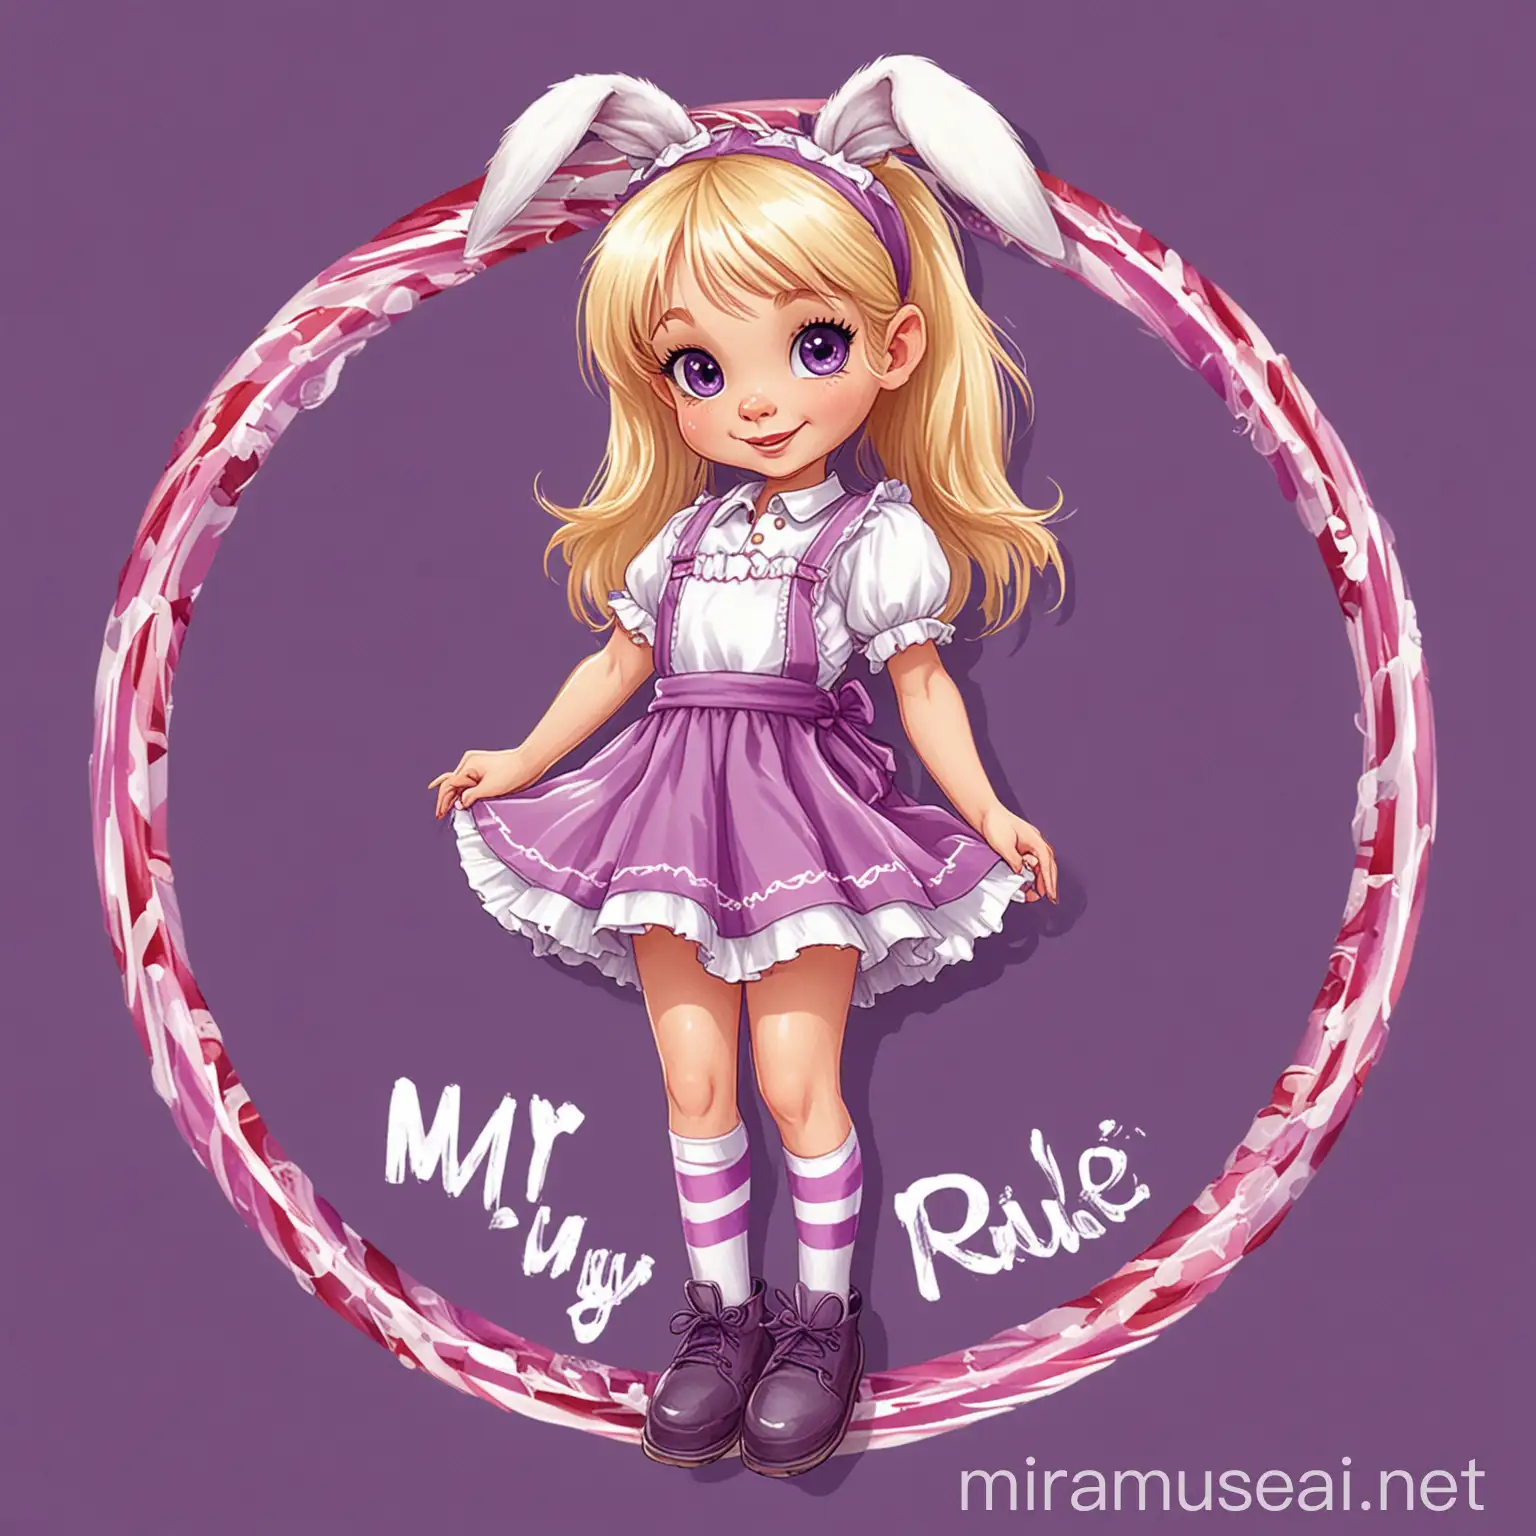 Cartoon Style Illustration Little Blond Girl with Bunny Ears and Candy Cane Stockings